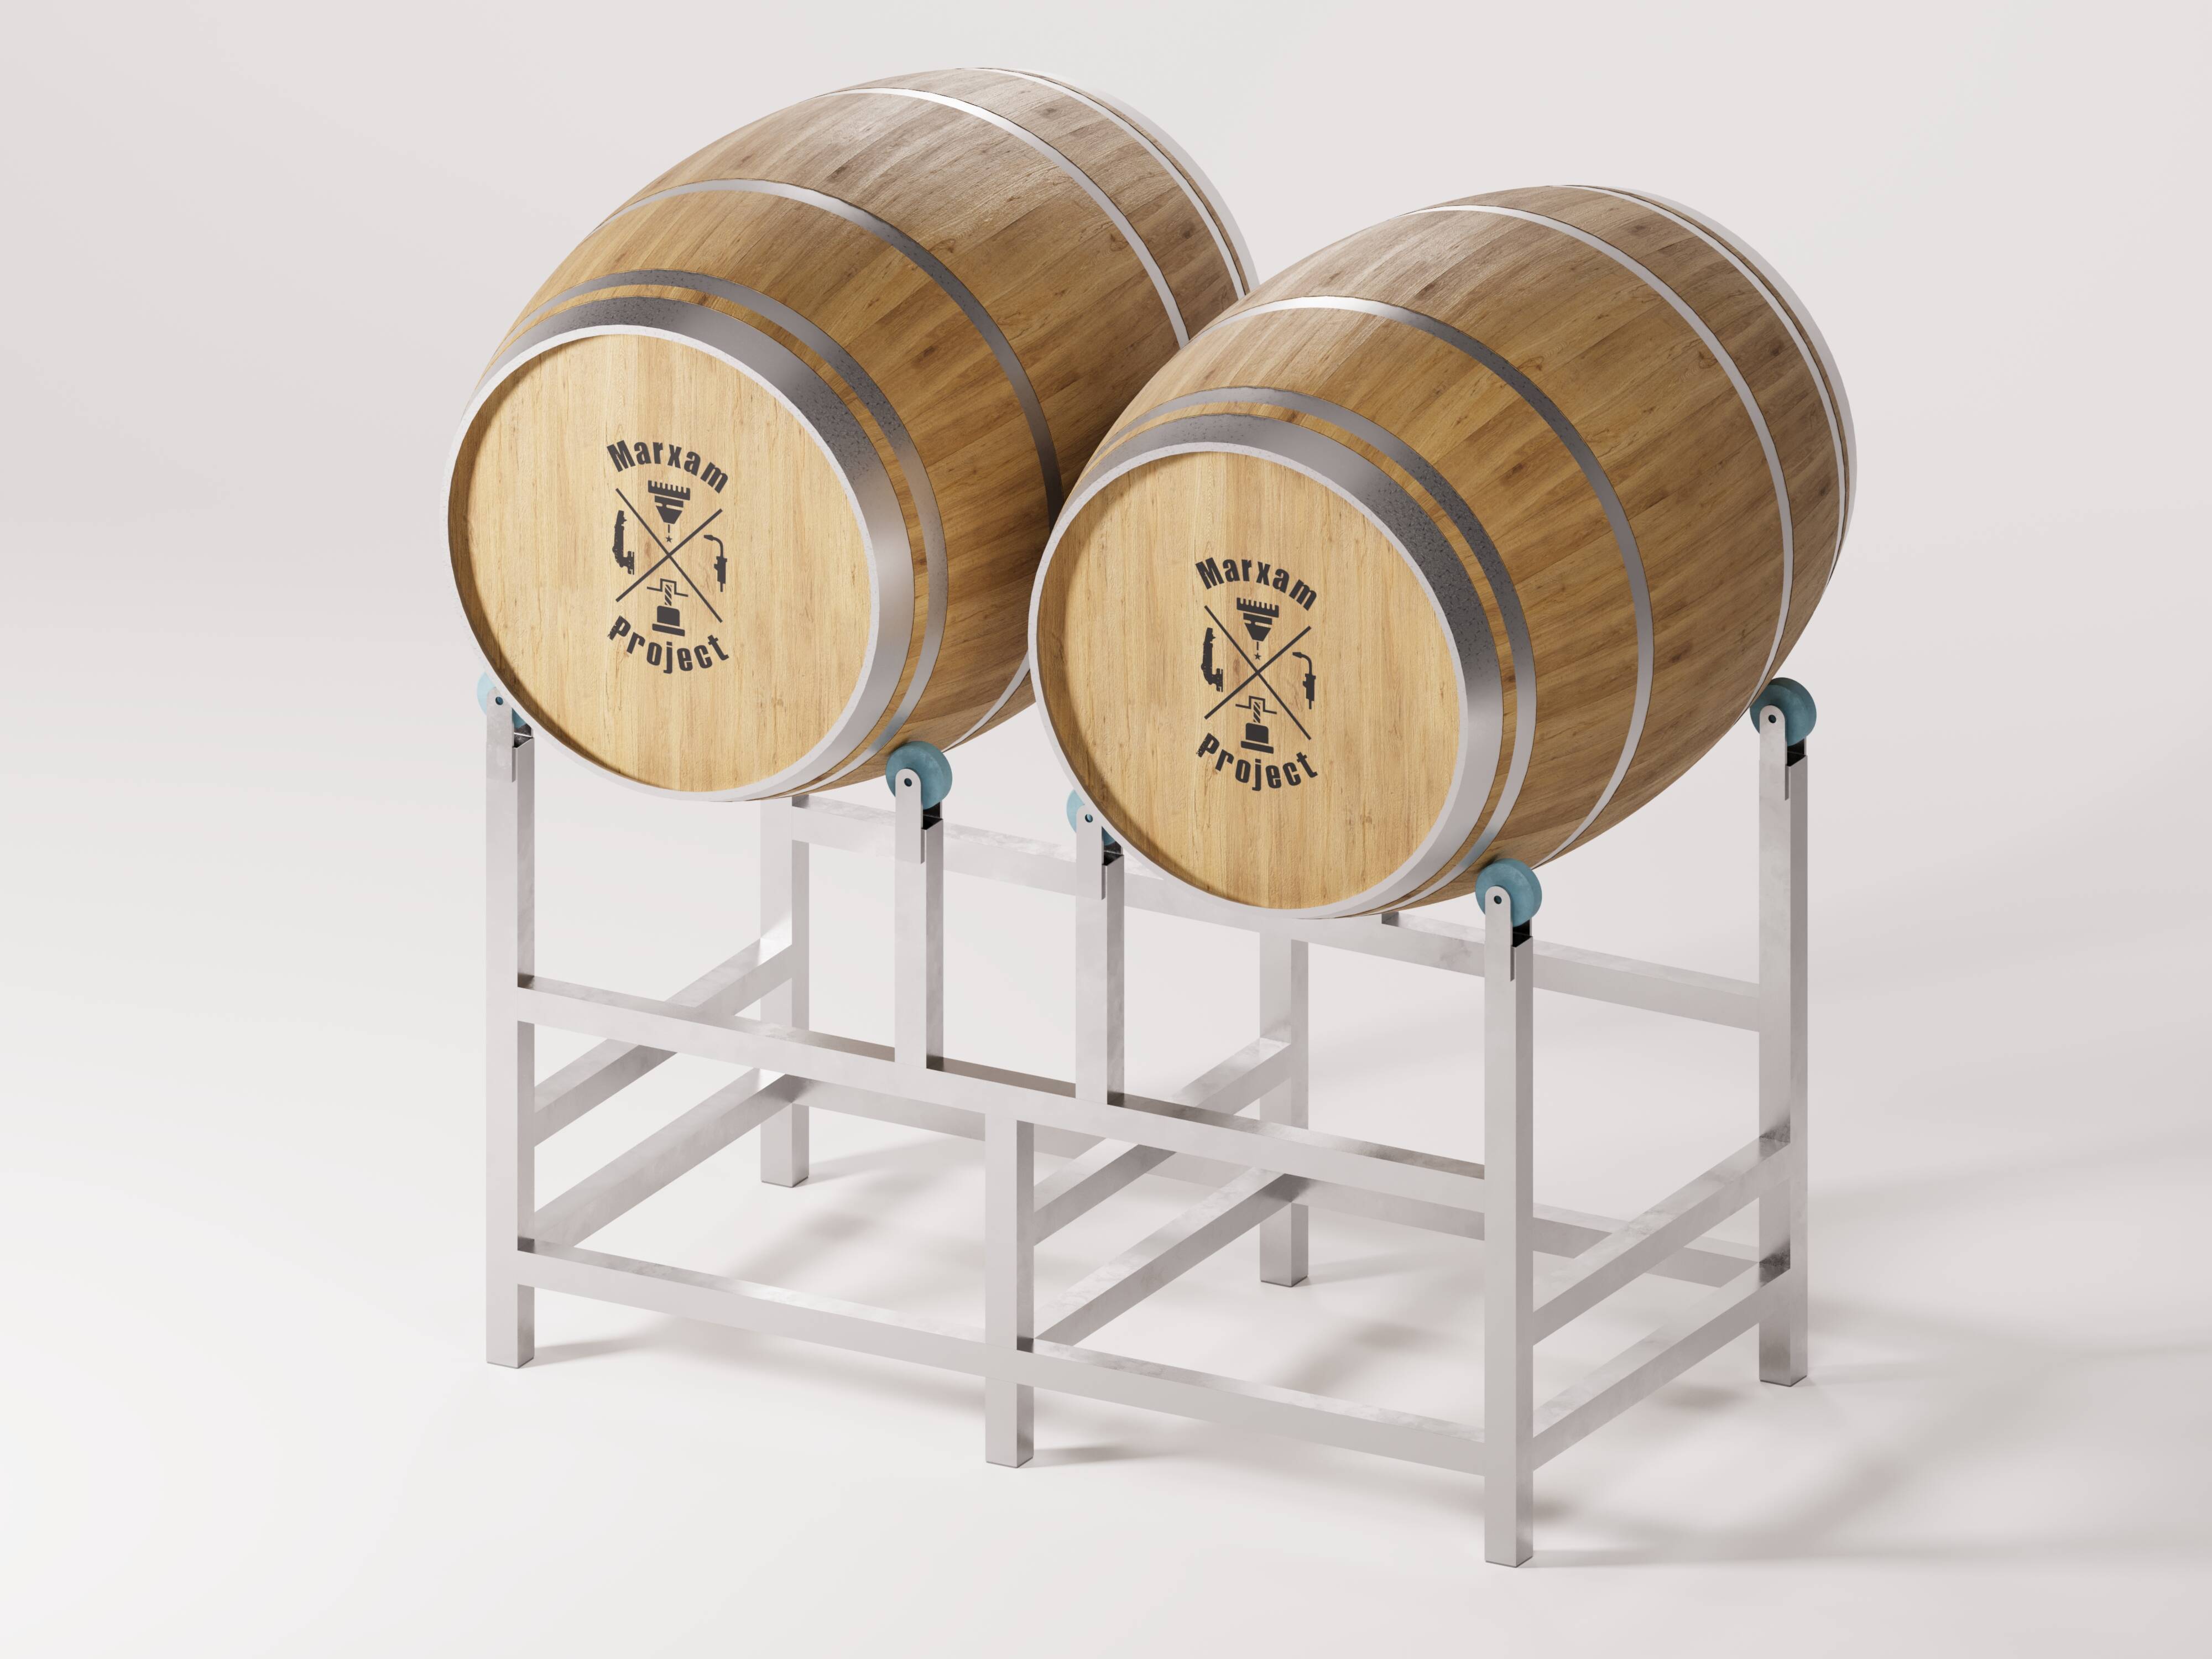 The image depicts a sturdy rotating barrel cradle supporting two well-maintained wooden barrels.